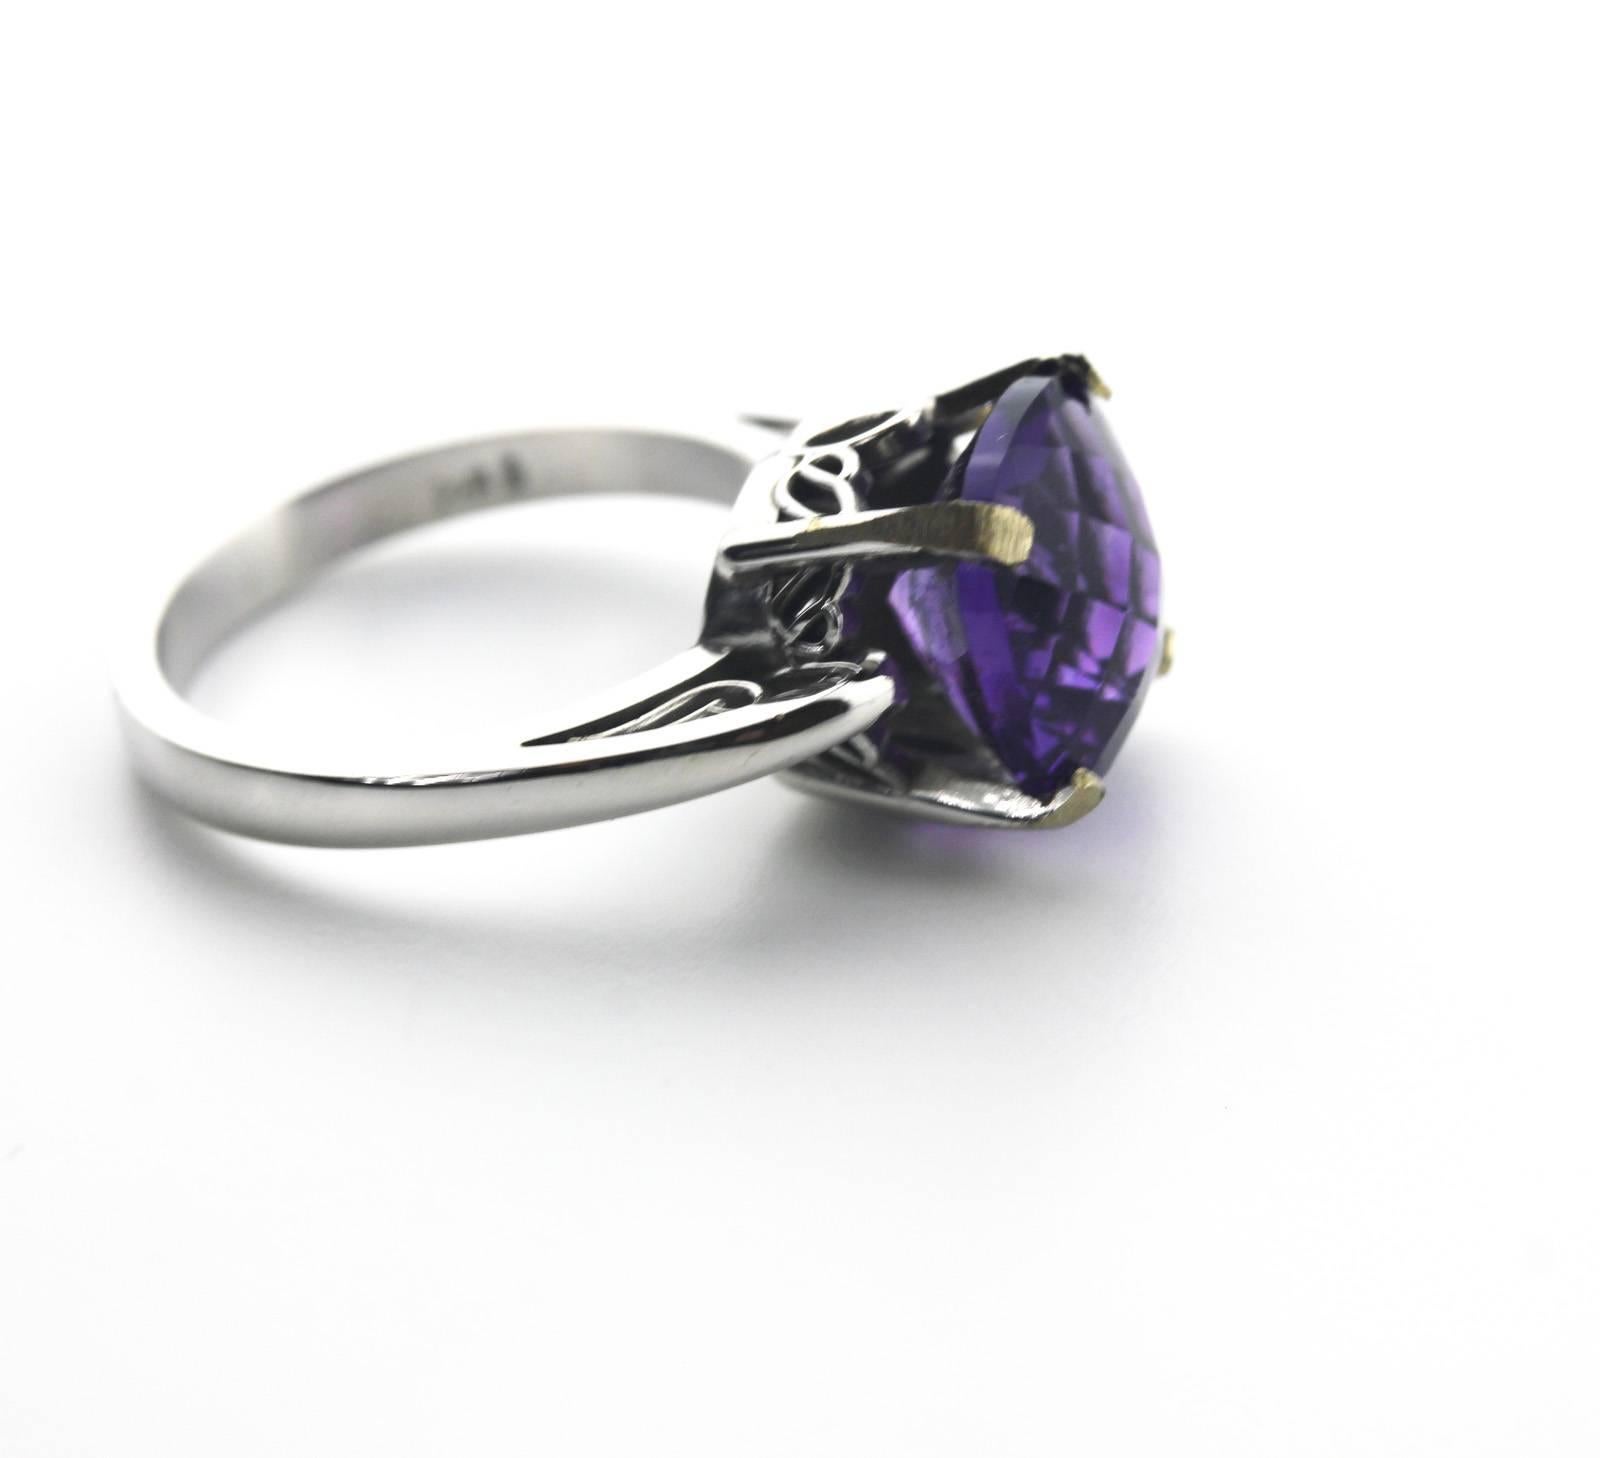 Wonderful gift of sparkling checkerboard cut cushion 3.95 carat natural Amethyst set in White Gold ring size 6 (sizable)